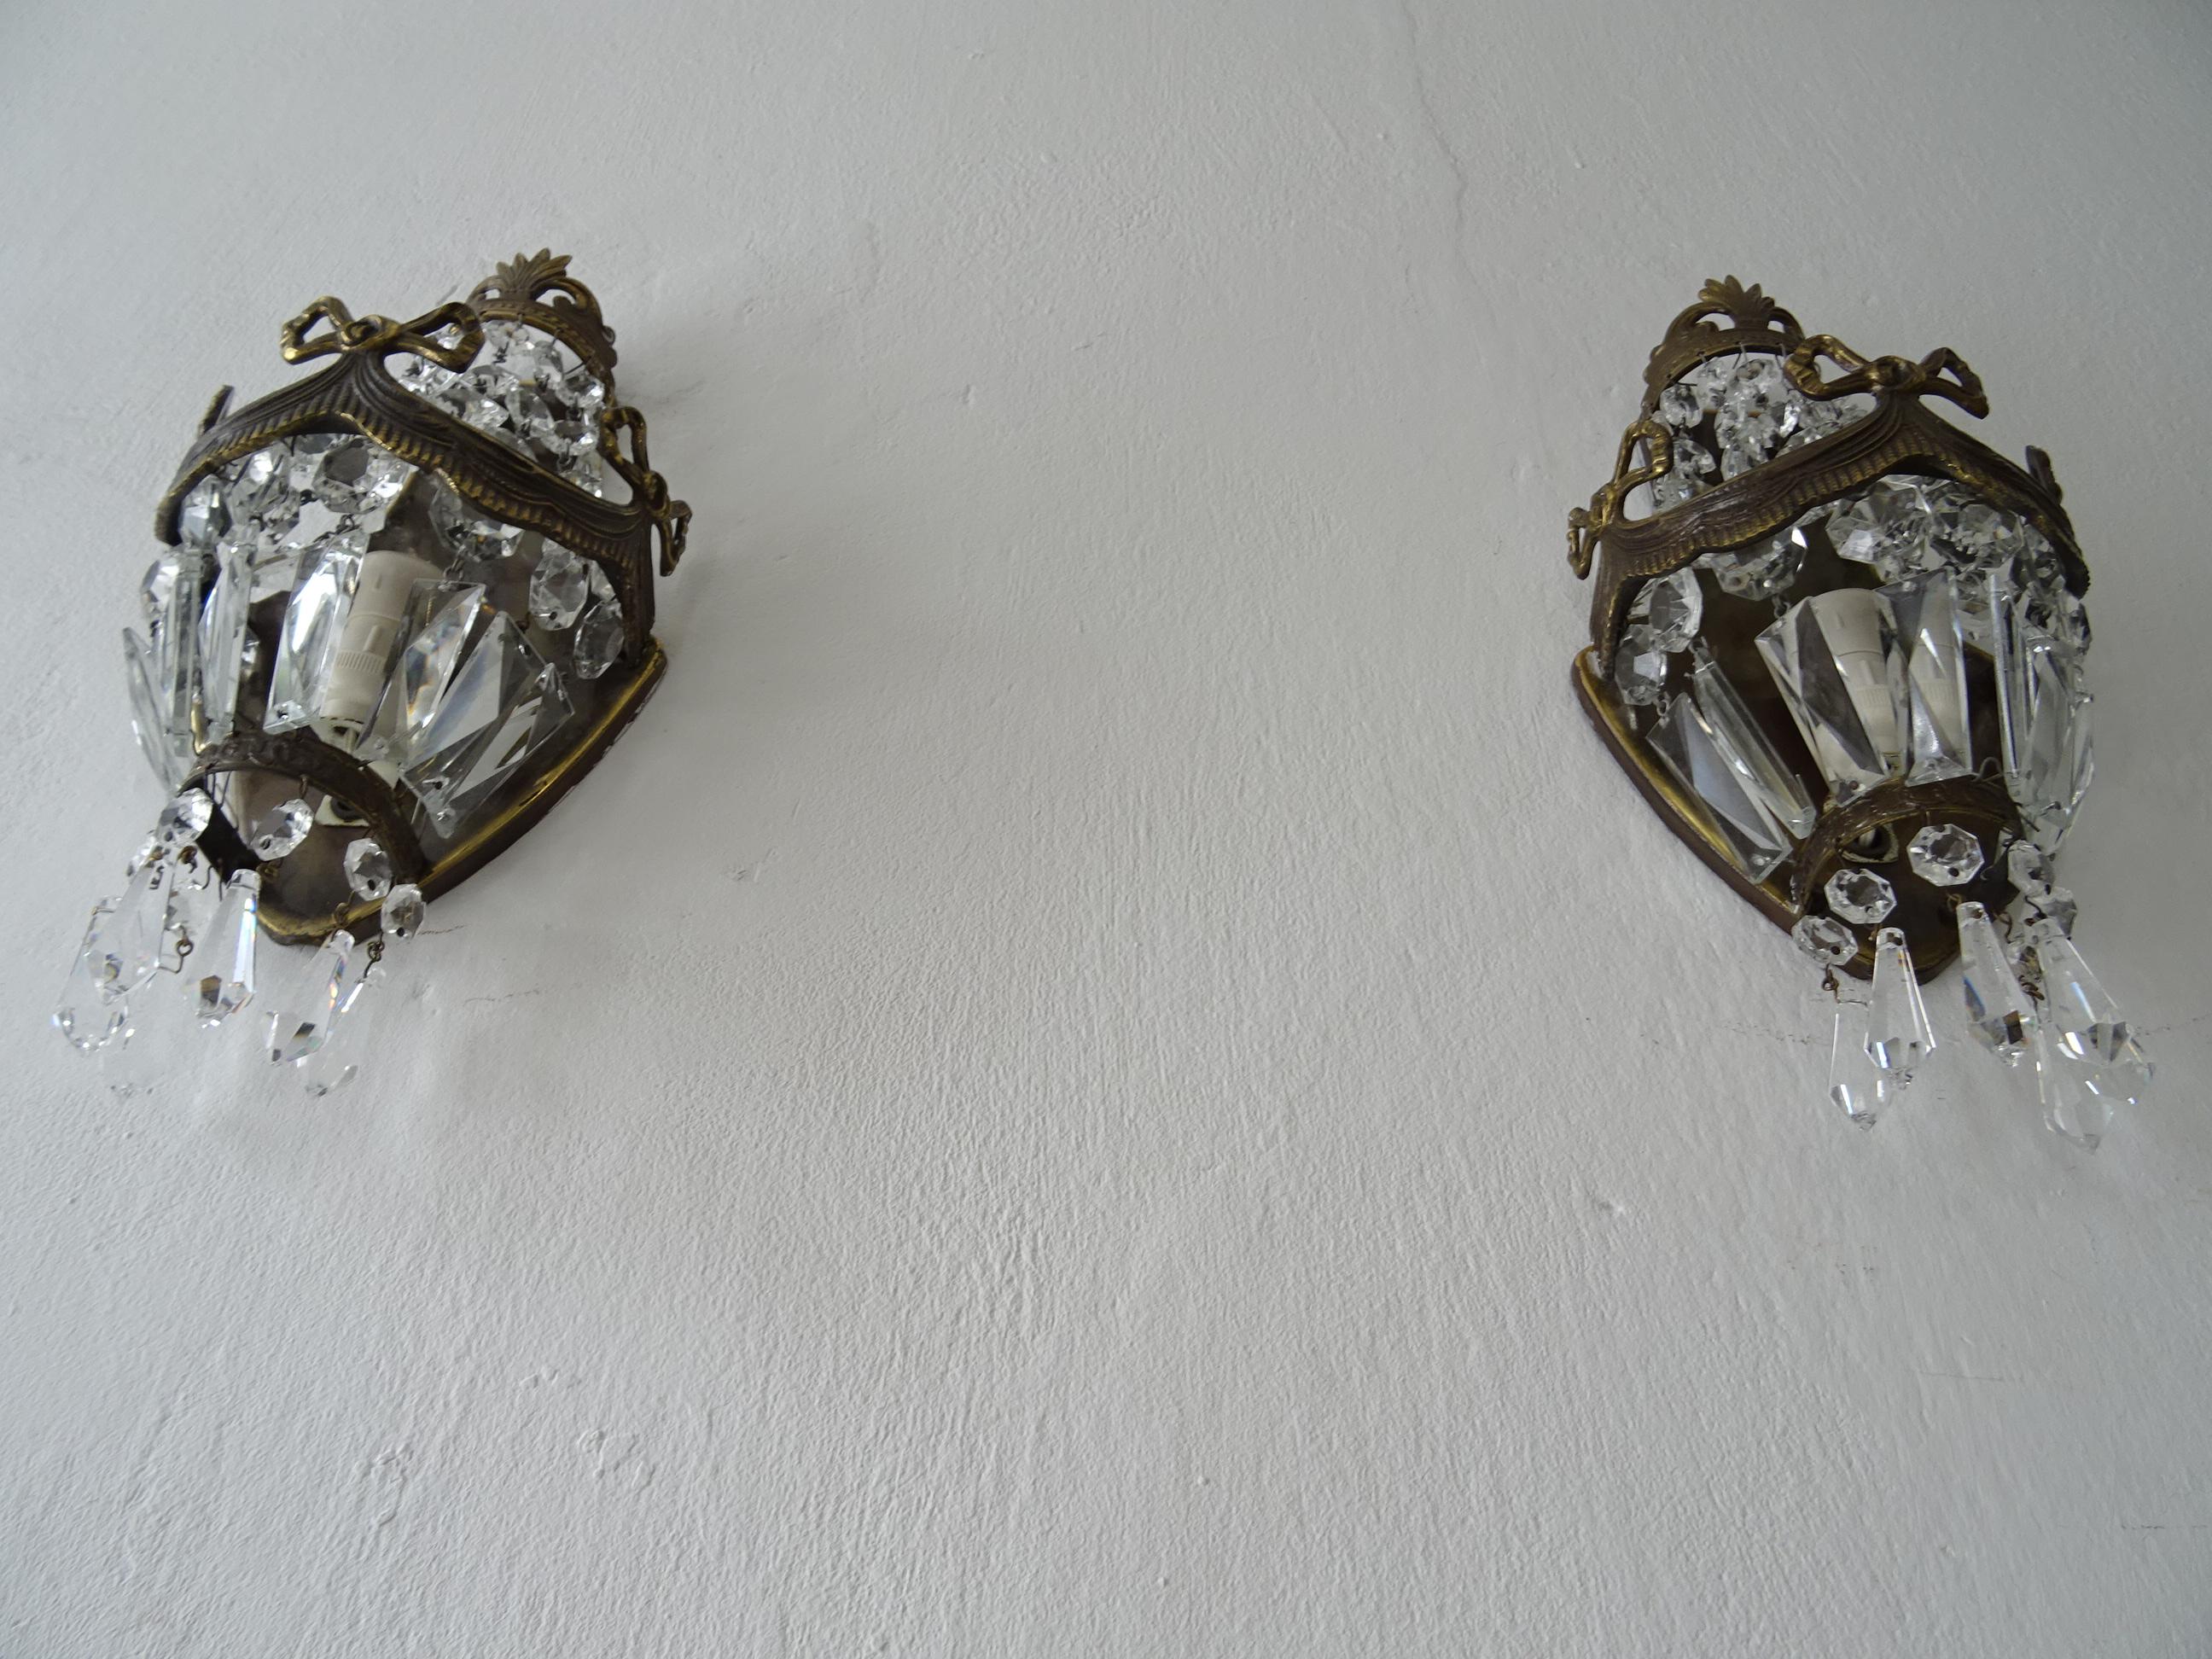 Housing one light each. Will be rewired with certified US UL sockets for the United States and appropriate sockets for all other countries and ready to hang. Bronze detail bows with great patina. Adorning crystal prisms, all intact. Free priority